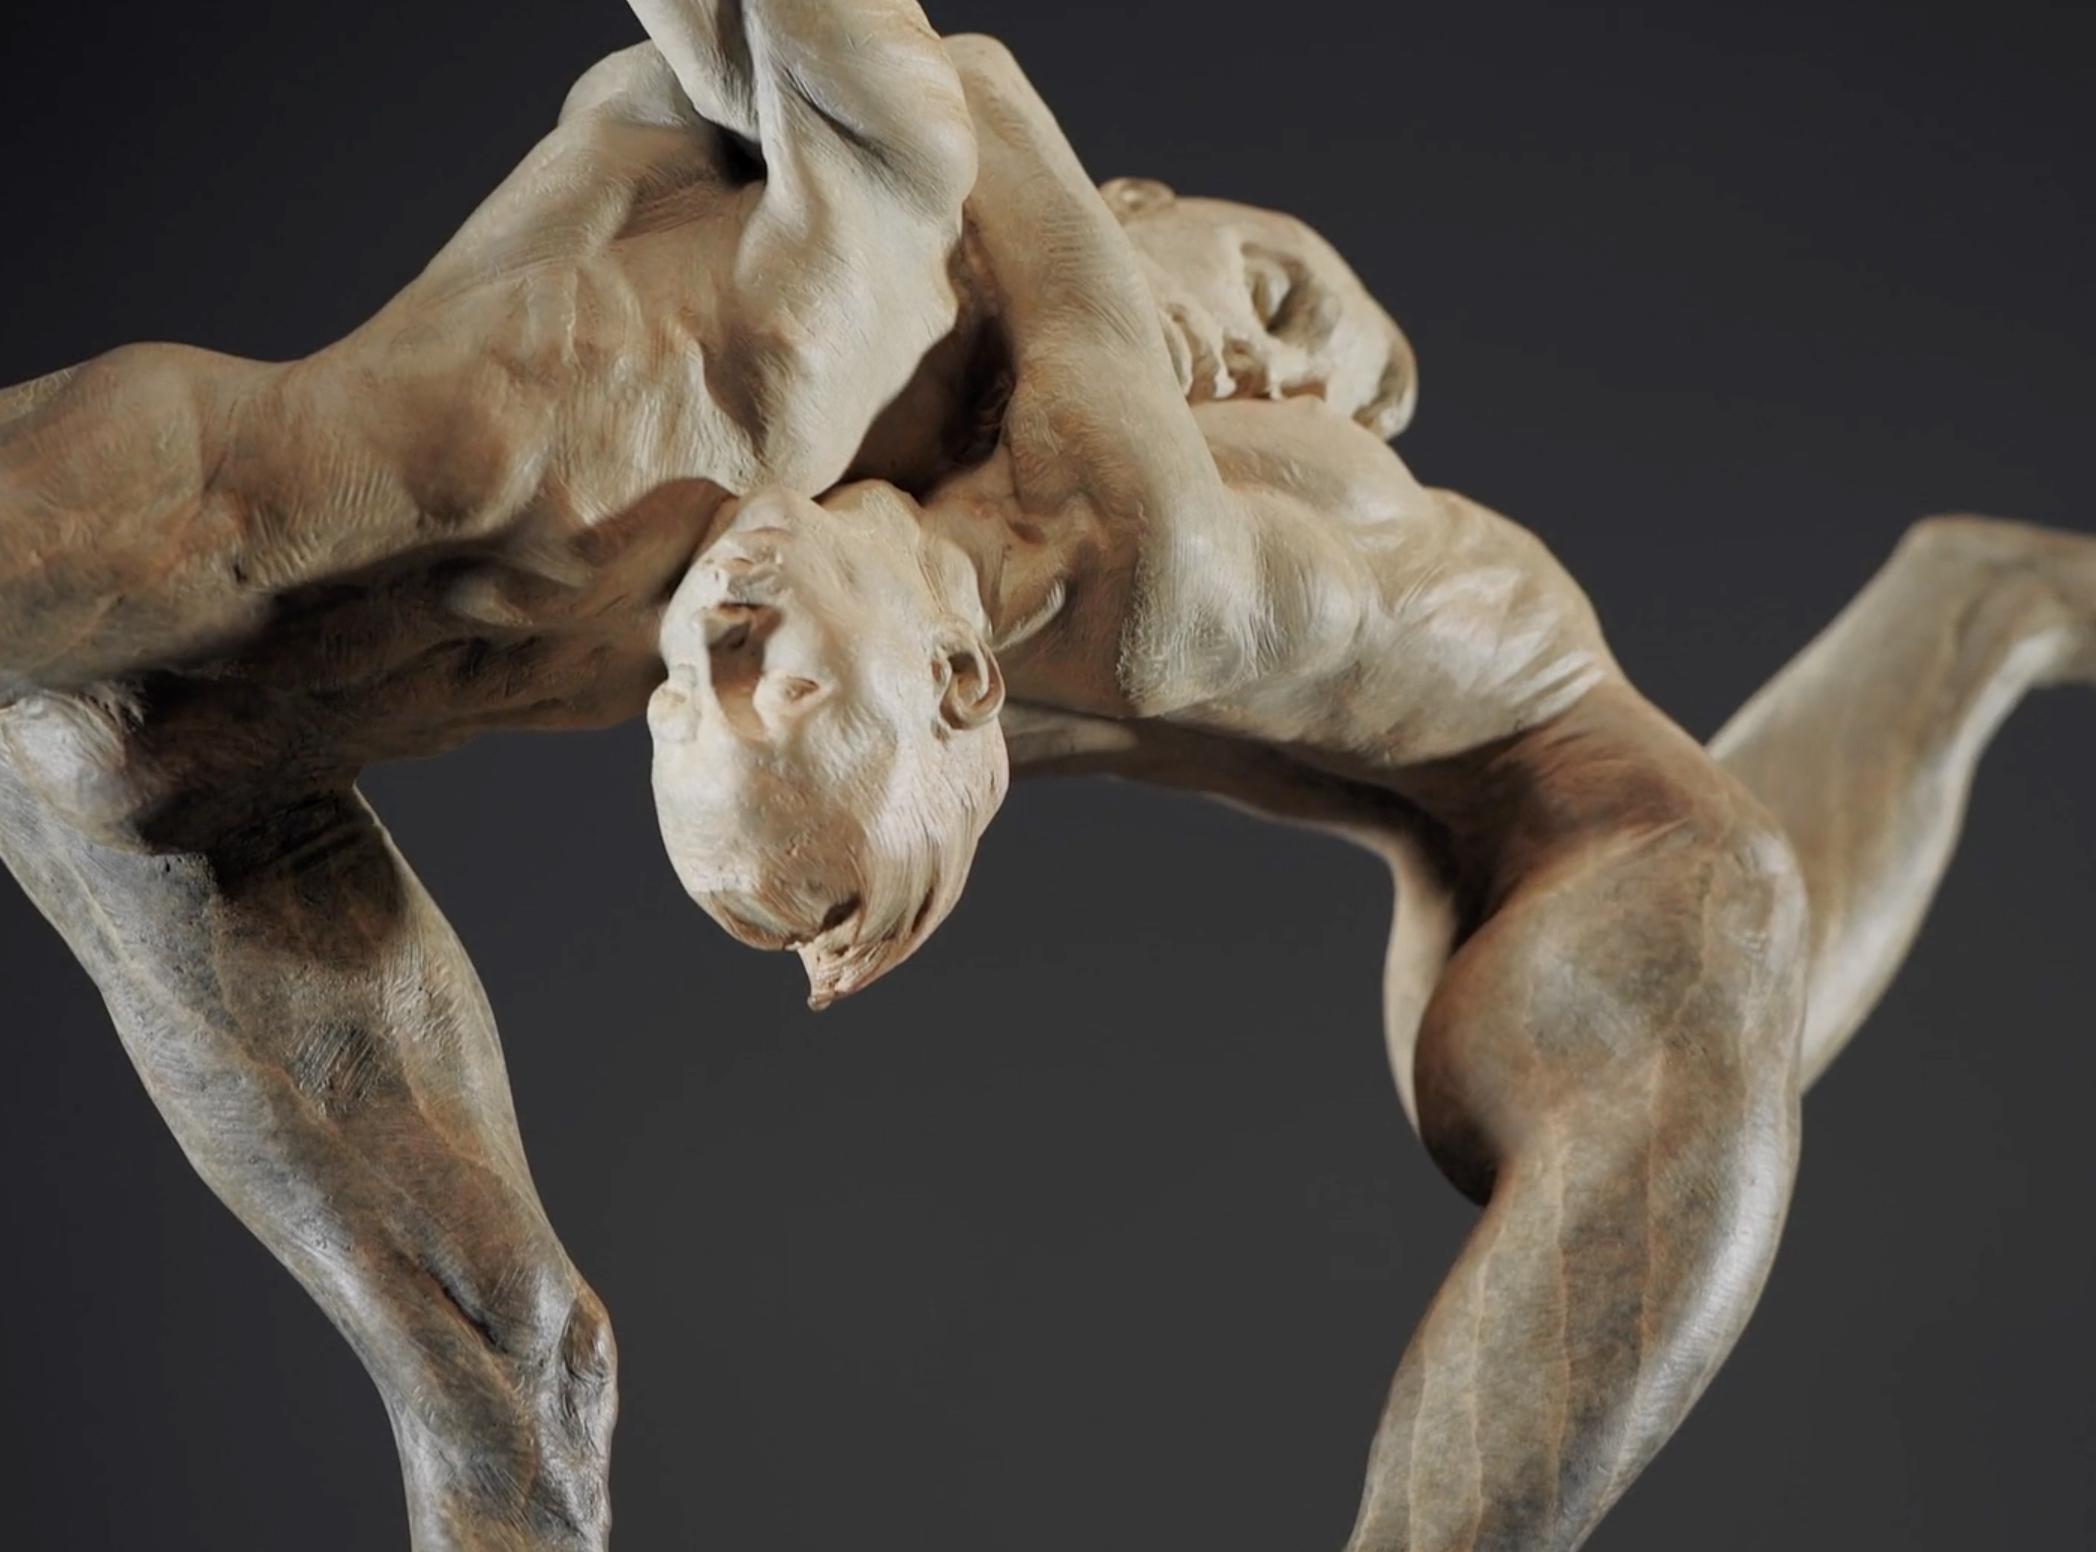 In Dance to Paradiso, Richard MacDonald masterfully selects an exceptional moment of observation as two figures dance with utter trust and harmony. Her foot one with his, their legs extend at the peak of modern romance. In this exciting work,